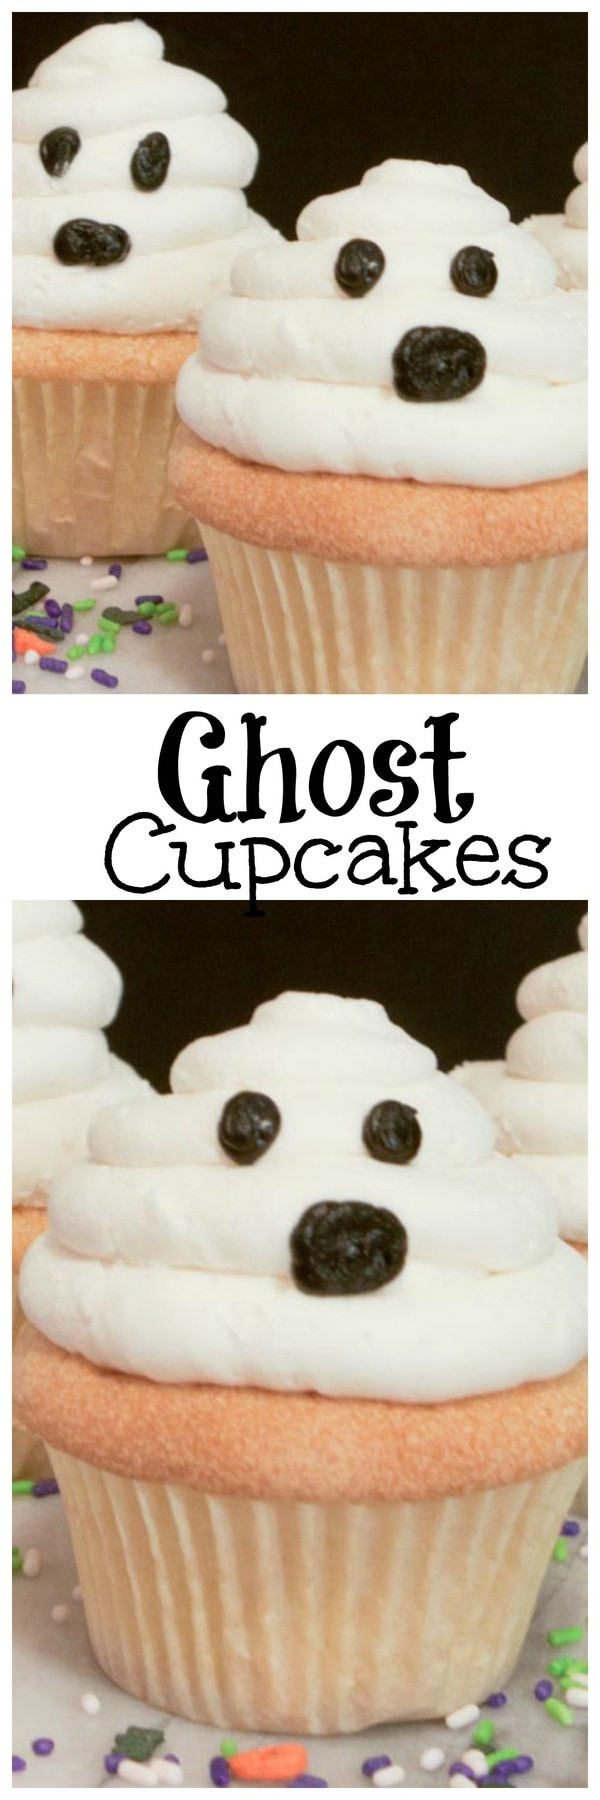 Halloween Cupcakes For Kids
 Ghost Cupcakes Recipe